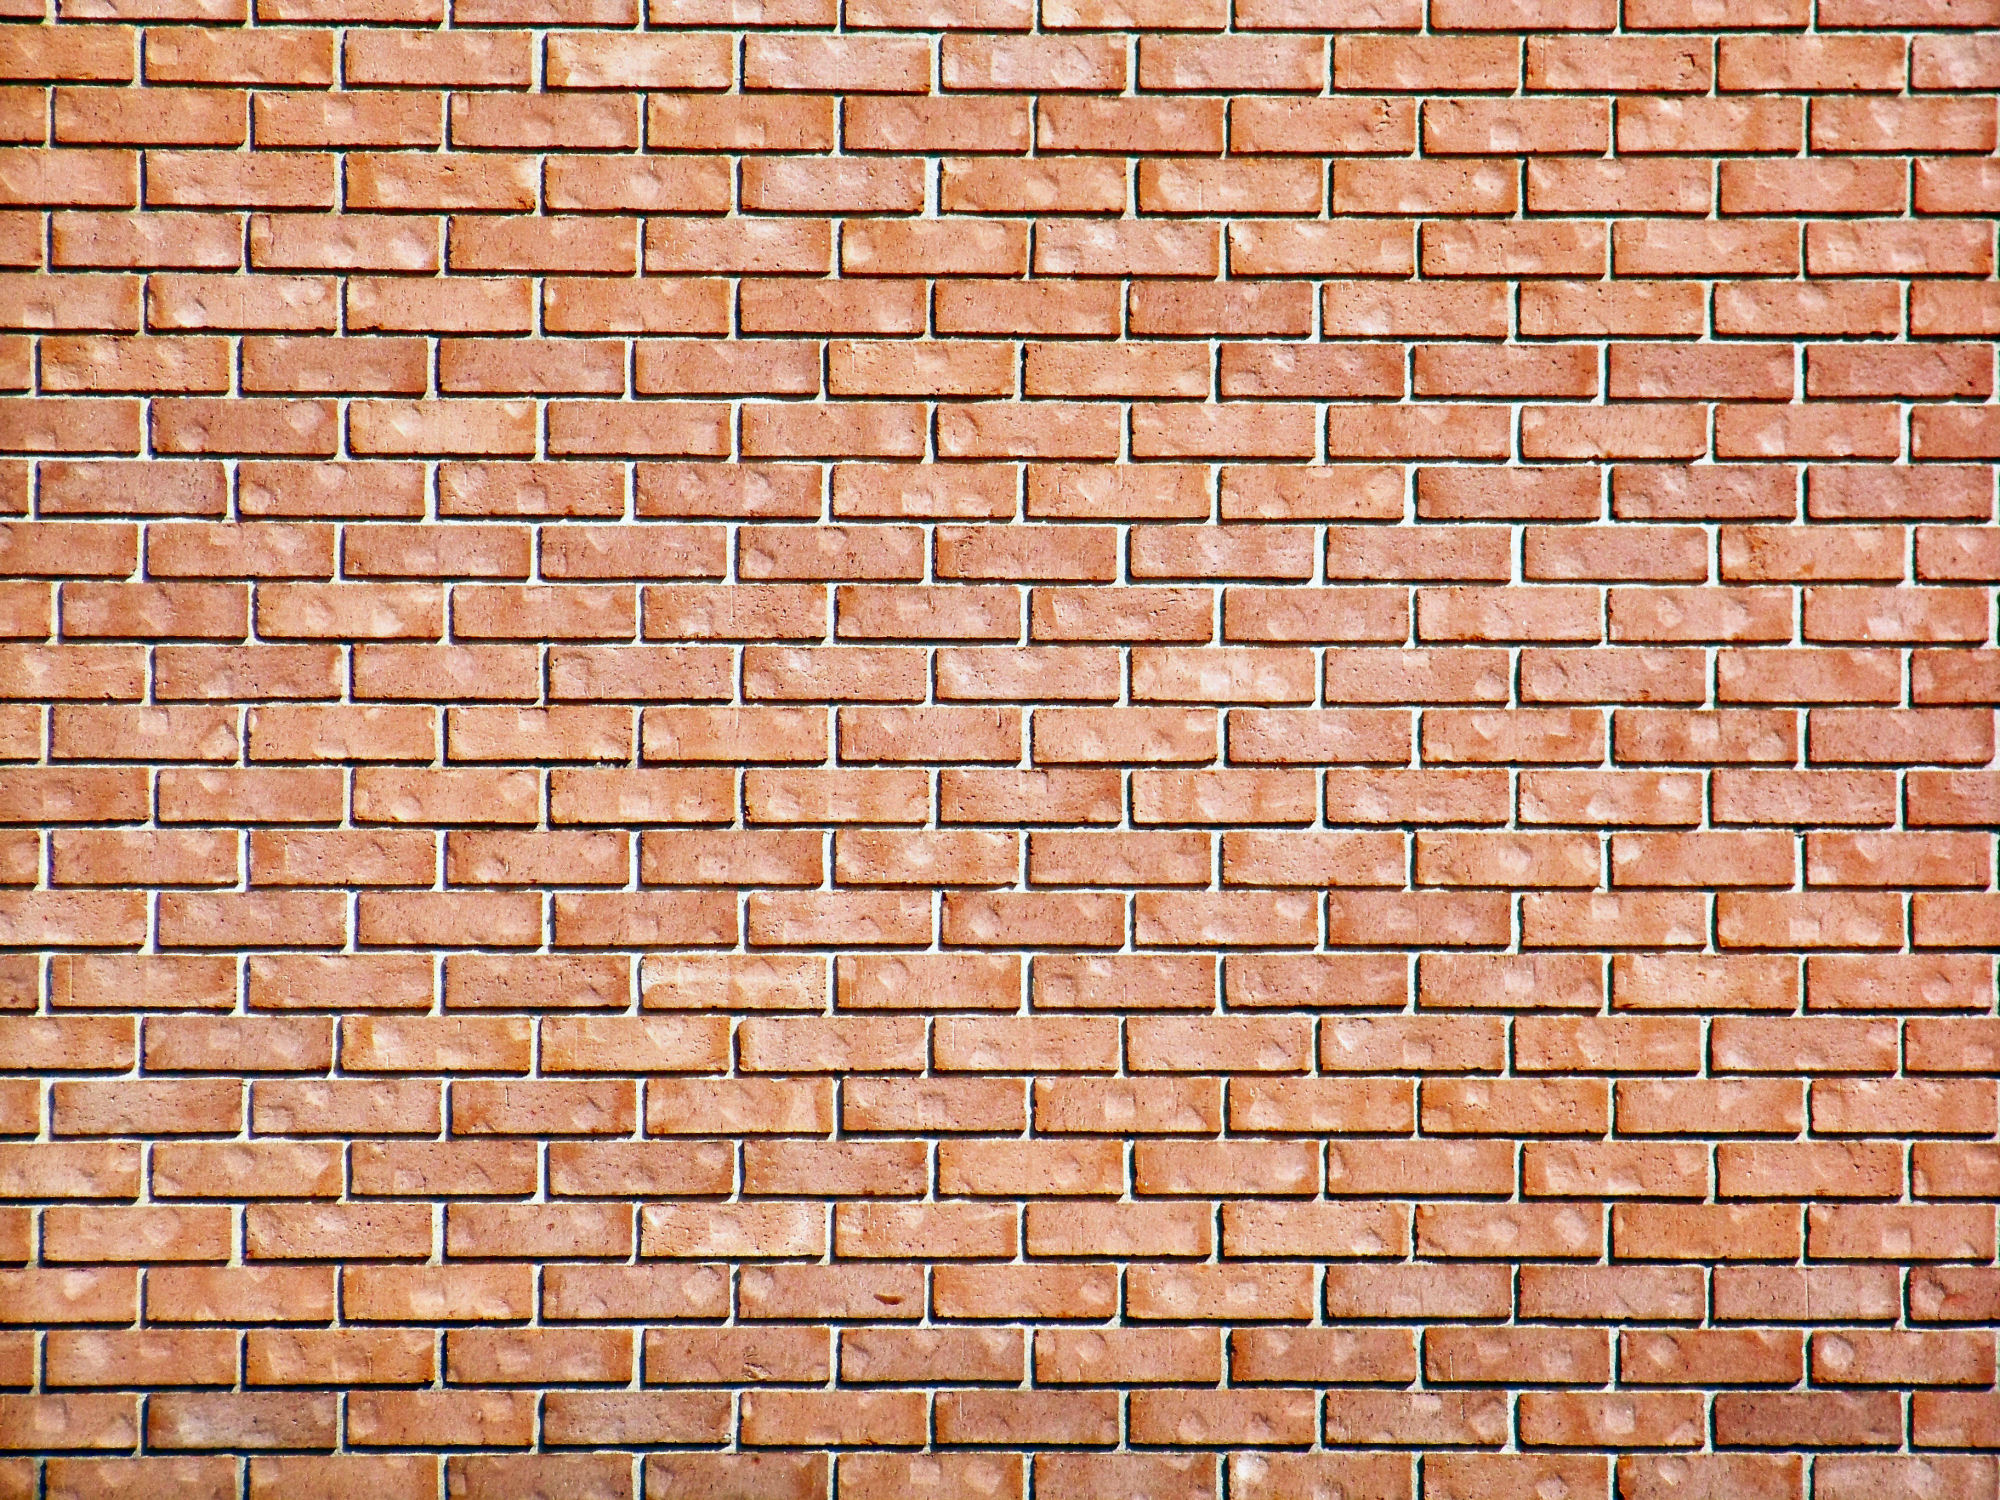 Brick Wall Of Light Red Bricks Suitable For A Background Or Matte